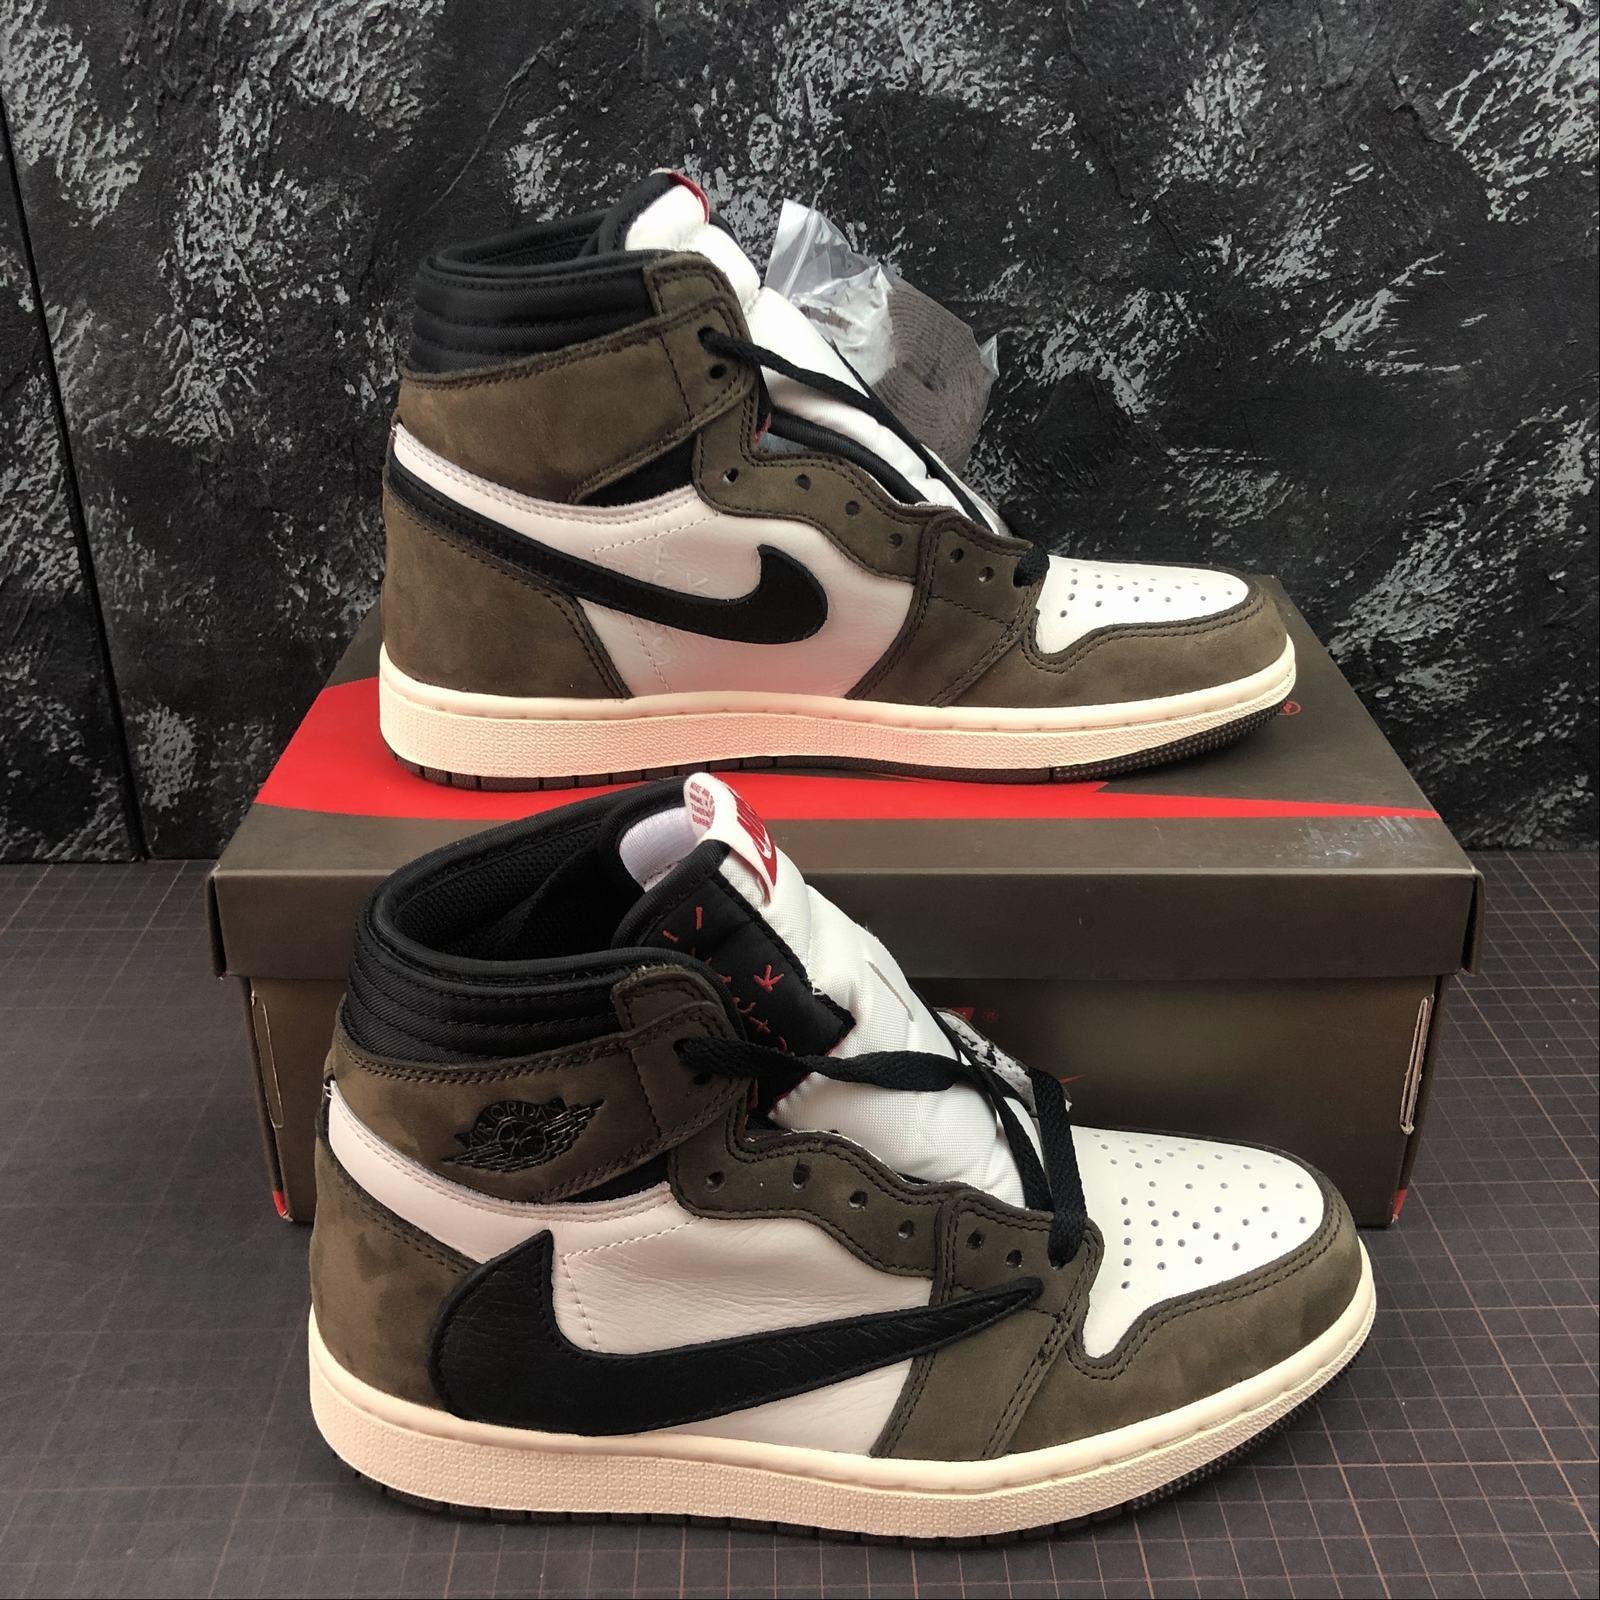 Wholesale Top Air Jordan 1 Mid Gs Basketball Shoes sneaker shoes (China  Trading Company) - Athletic & Sports Shoes - Shoes Products -